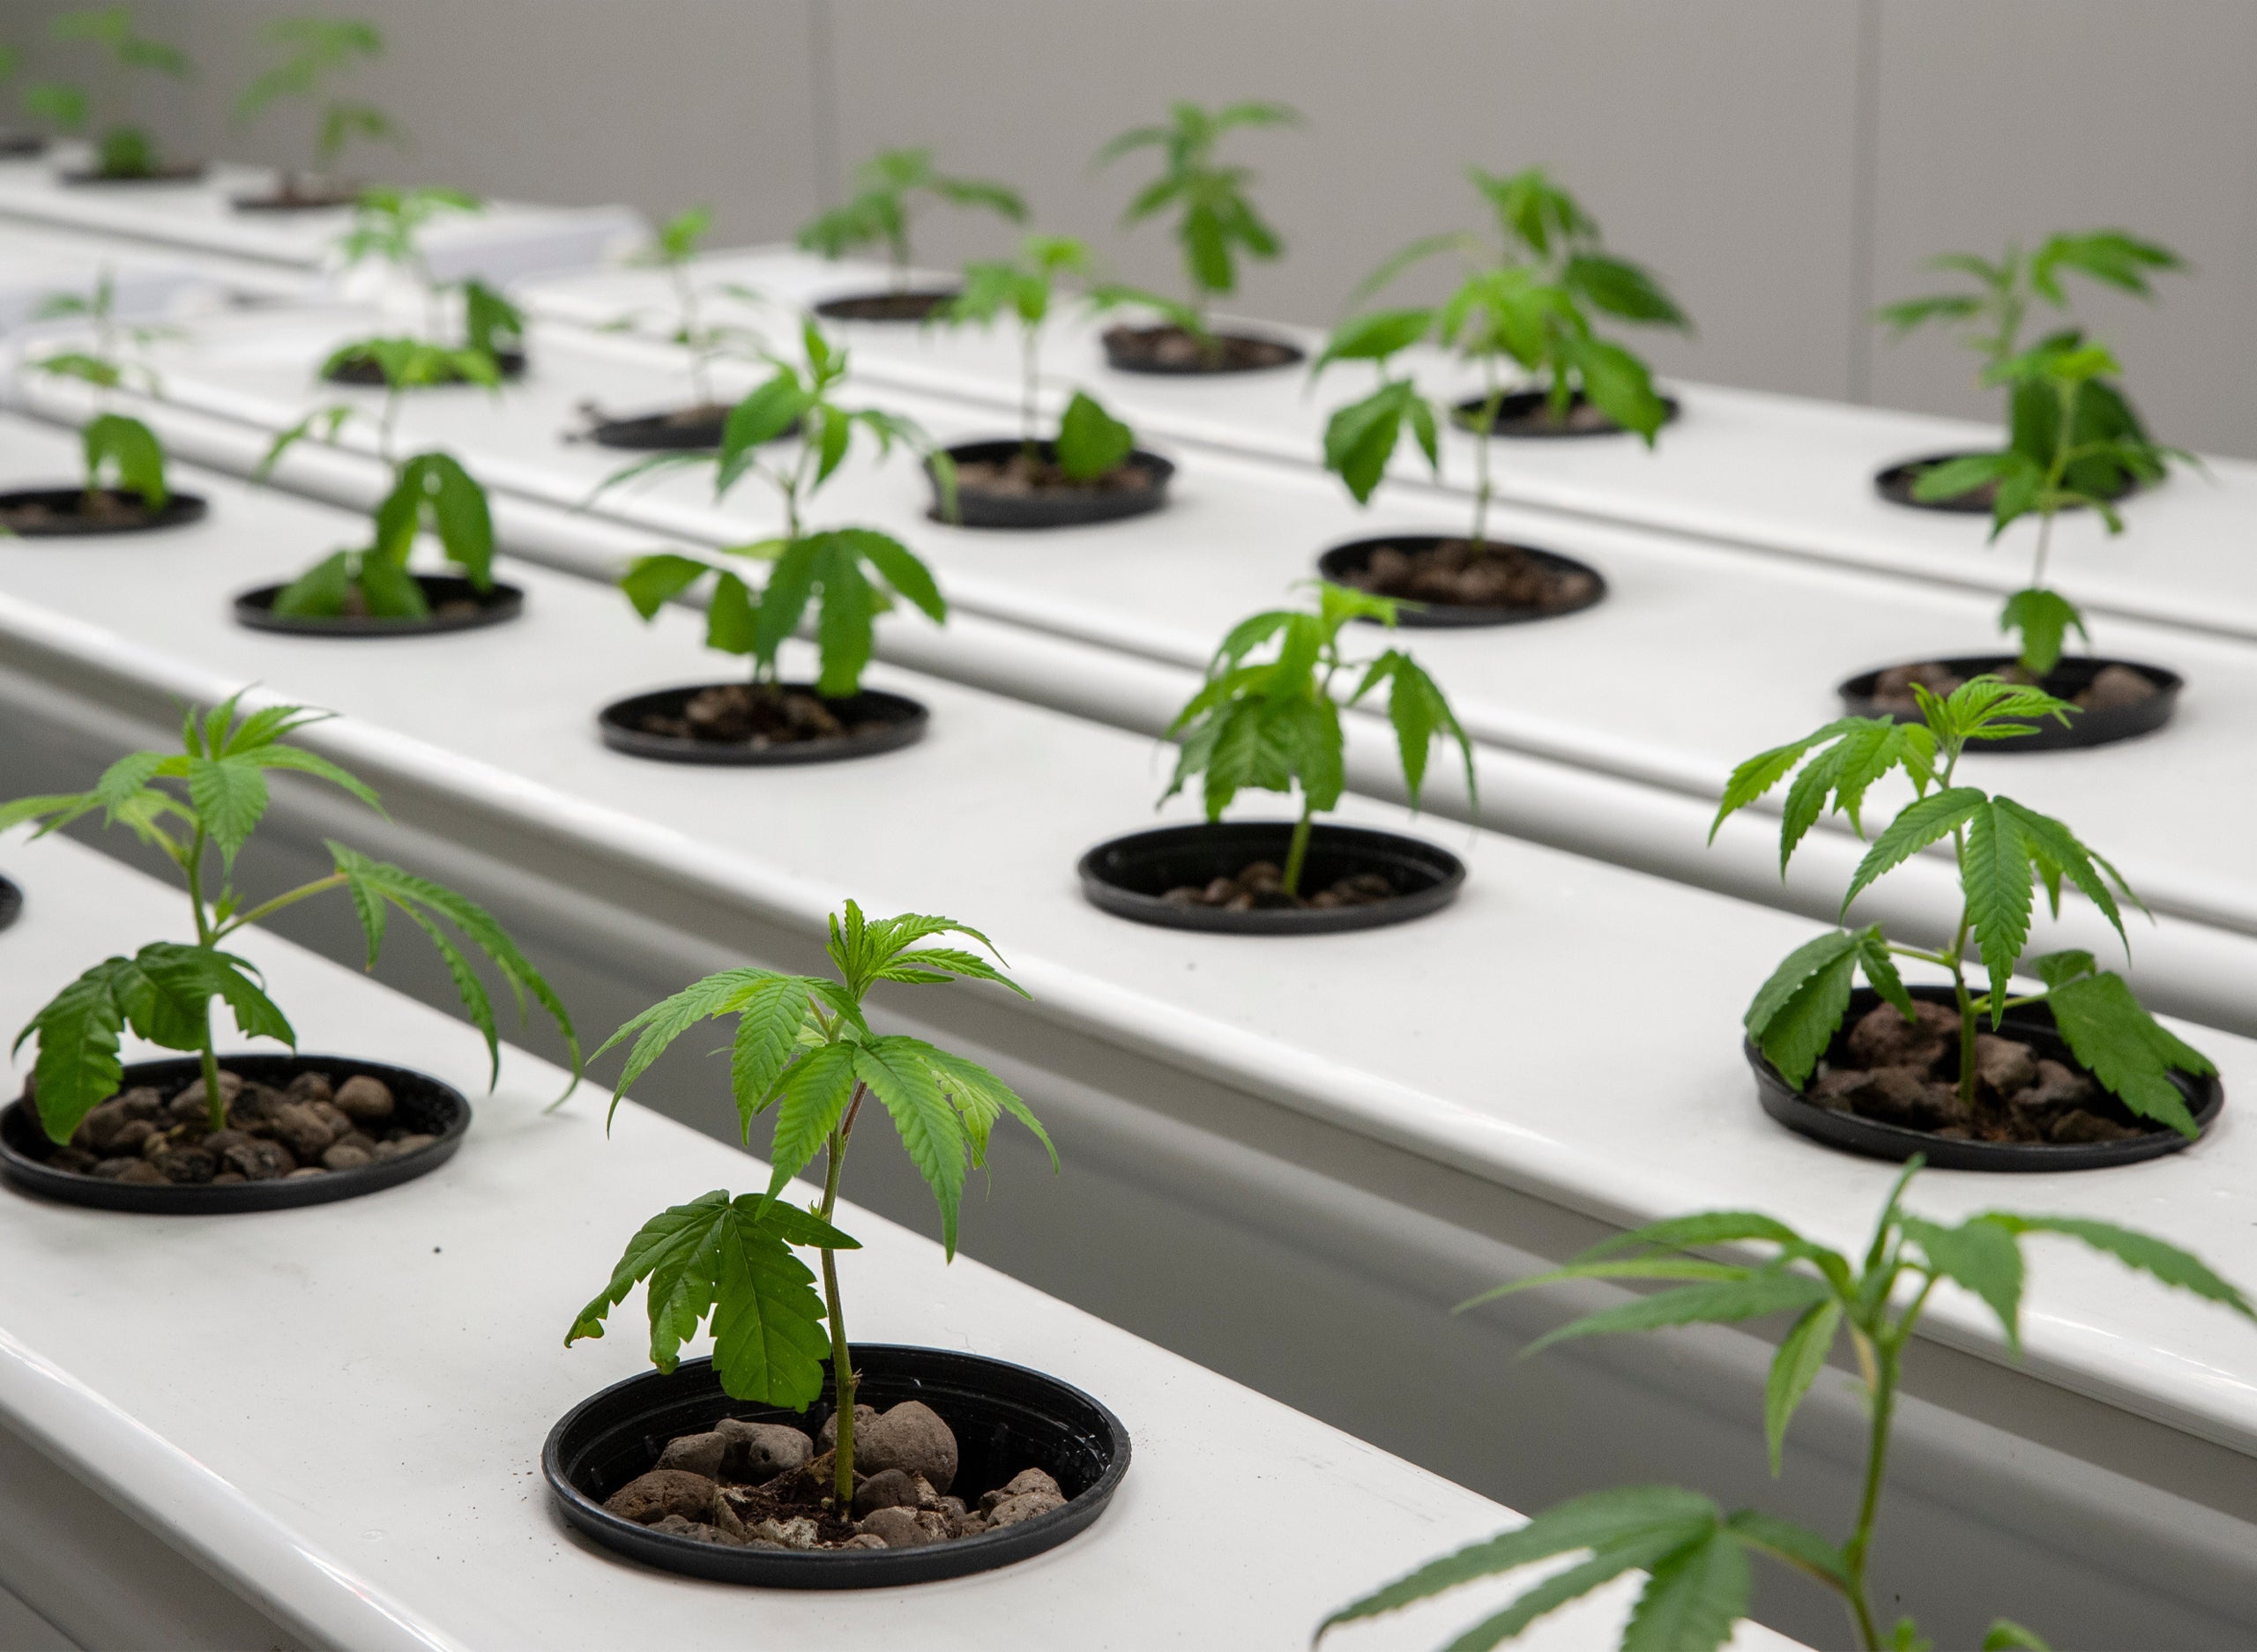 Hydroponic Systems for Cannabis - Marijuana Packaging